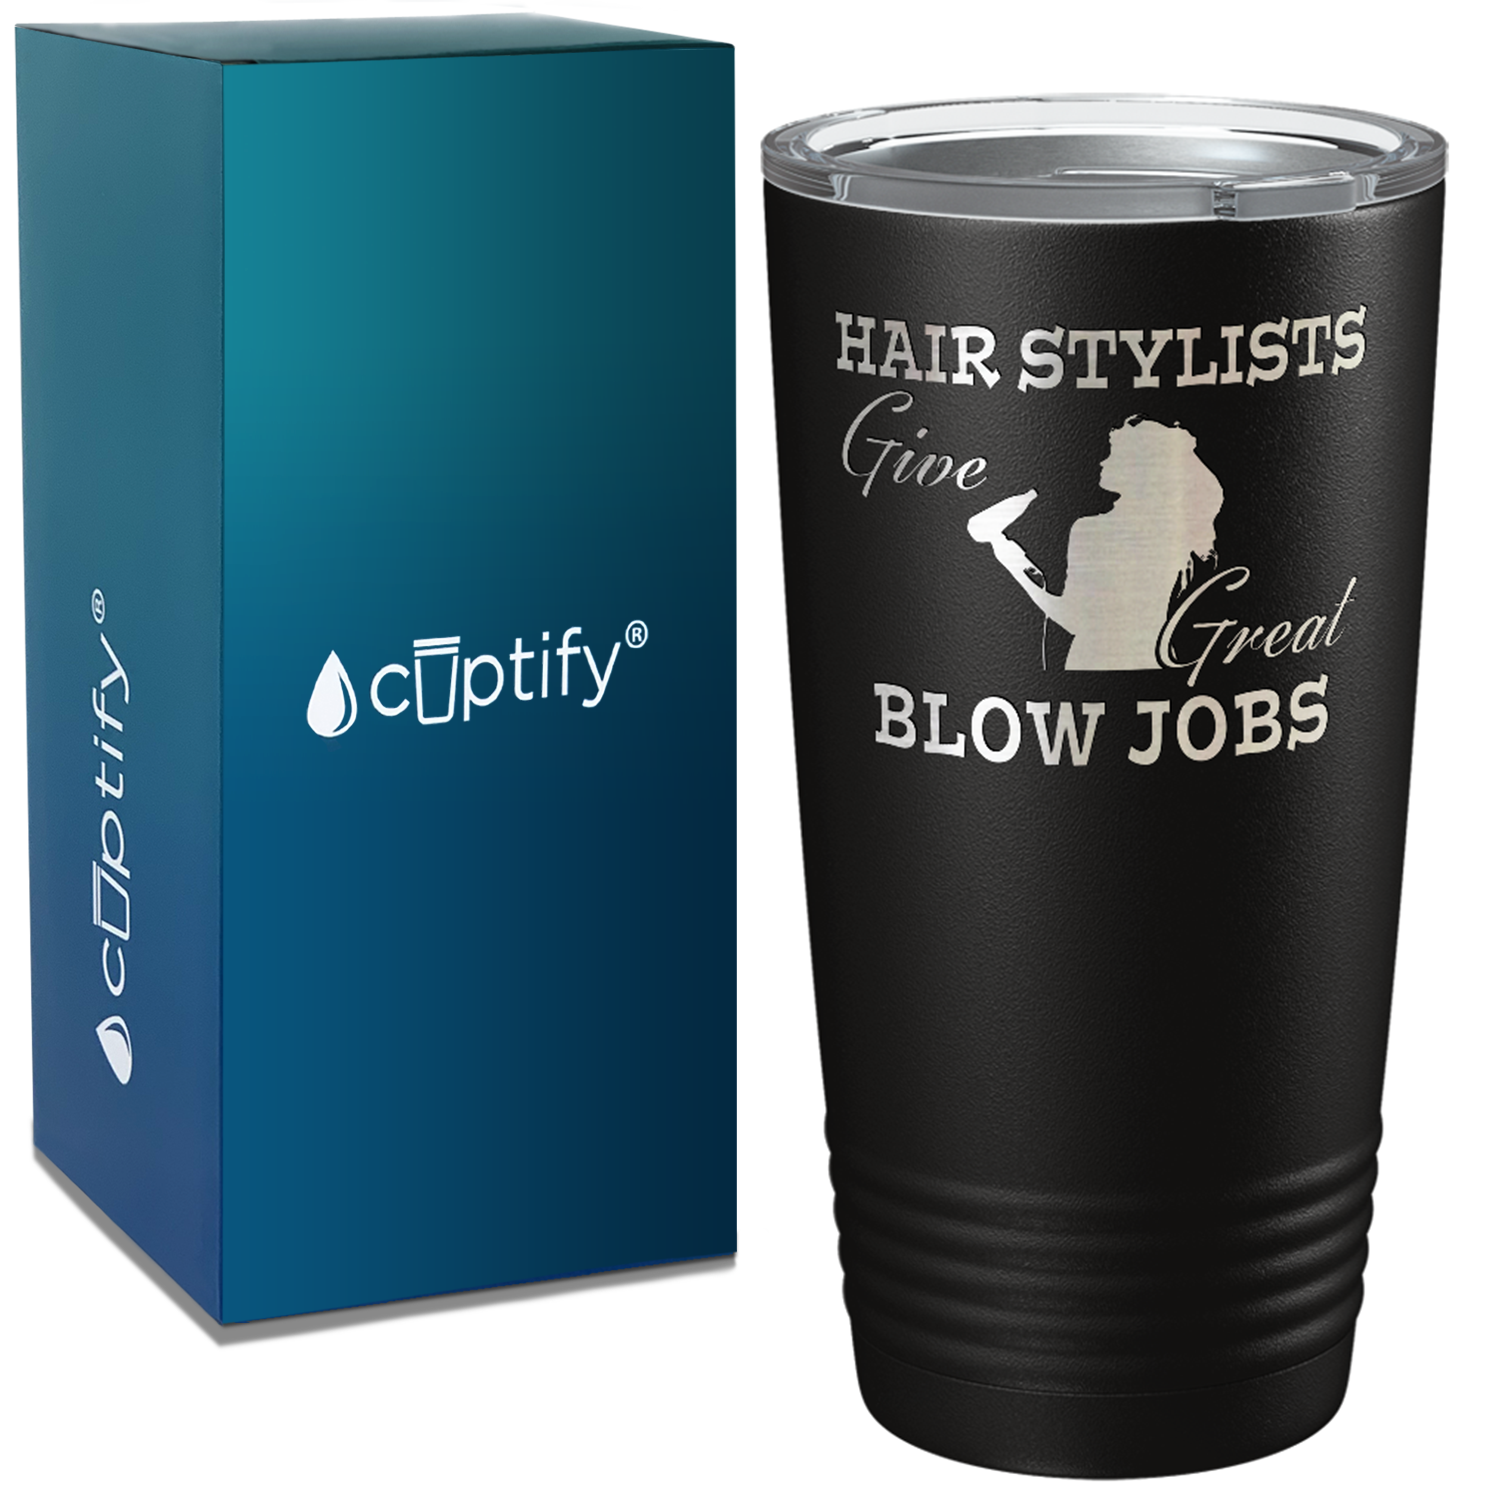 Hair Stylist Give Great Blow Jobs Laser Engraved on Hairstylist 20oz Tumbler